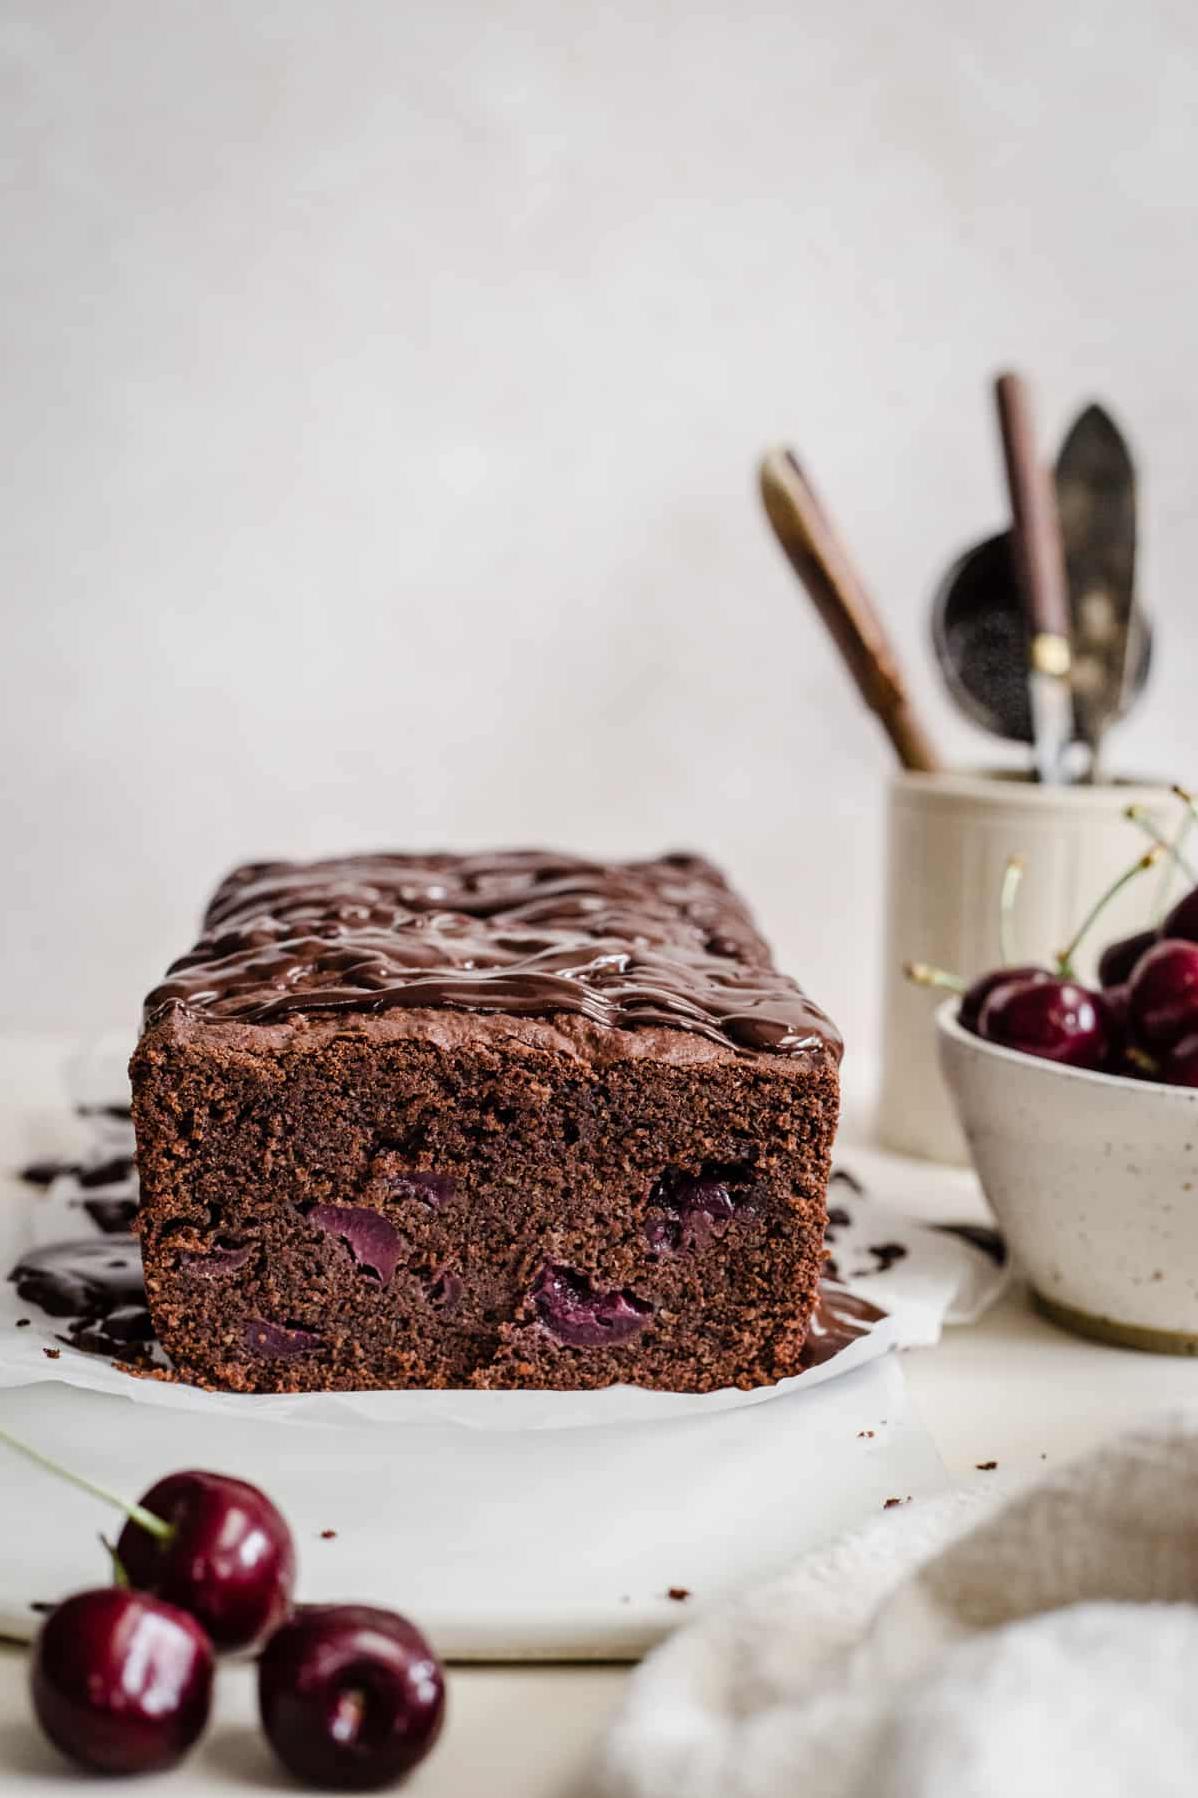  Chocolate and cherry are a match made in heaven in this cake.